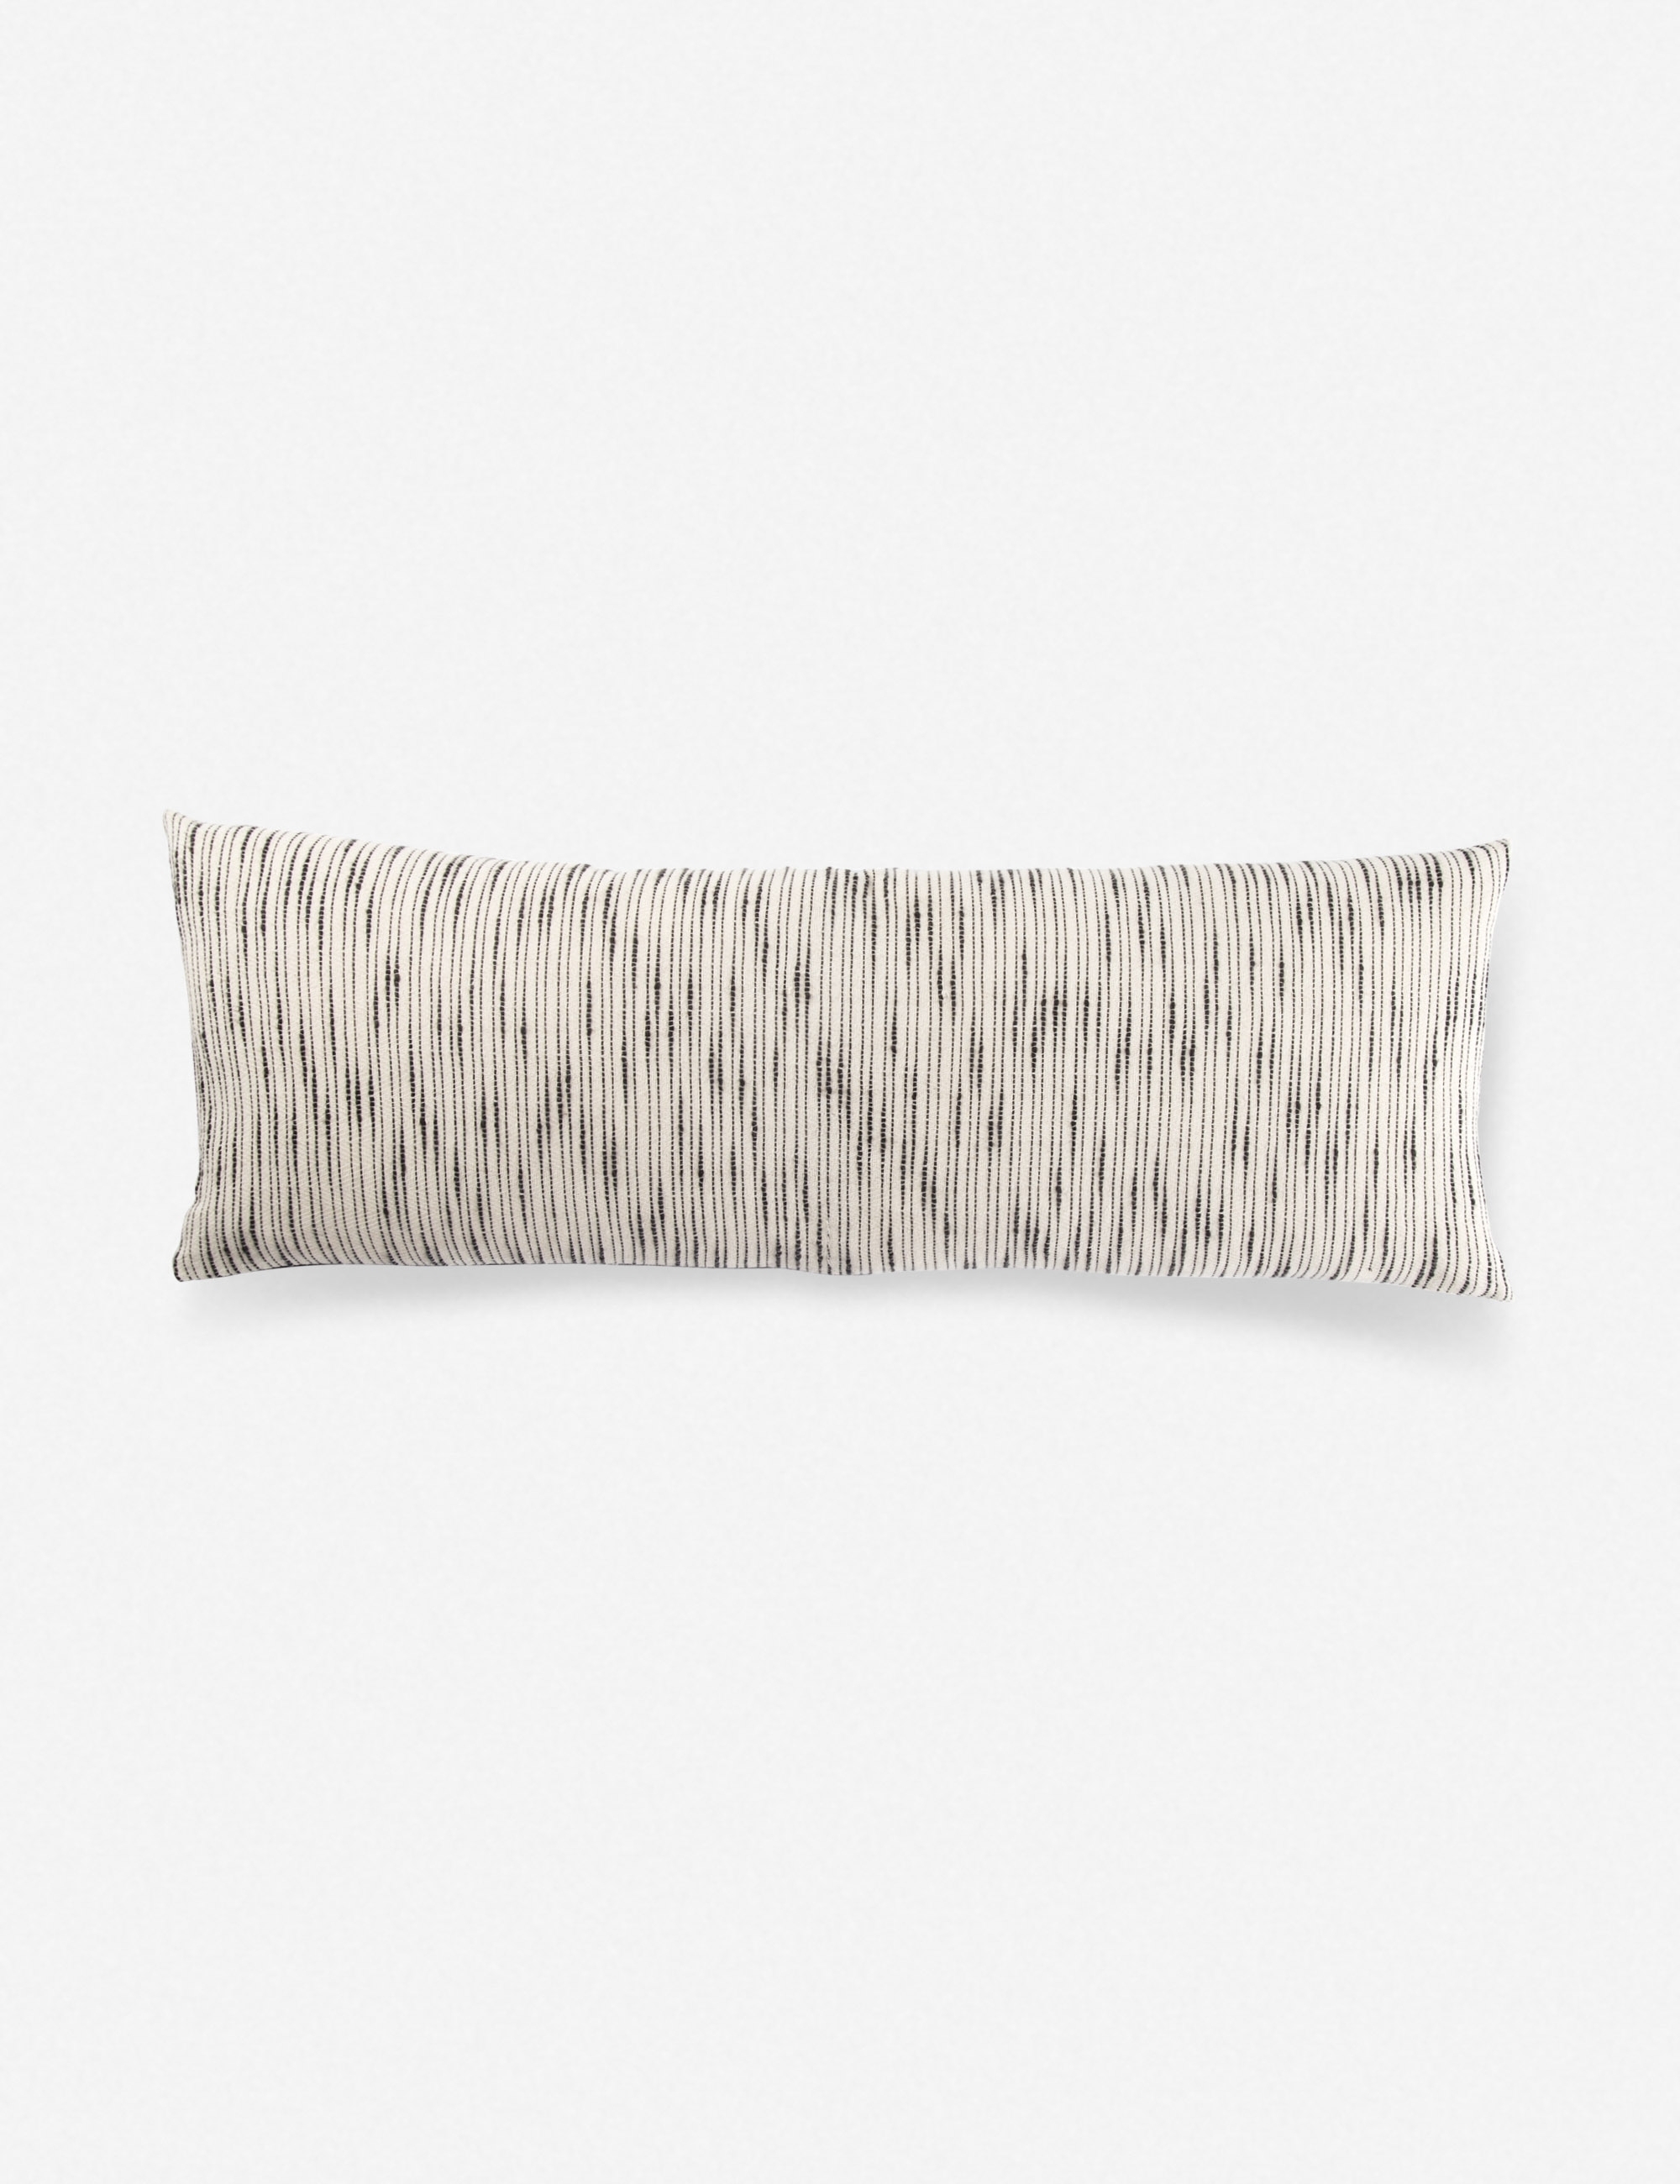 Peregrine Long Lumbar Striped Pillow, White and Gray - Image 0